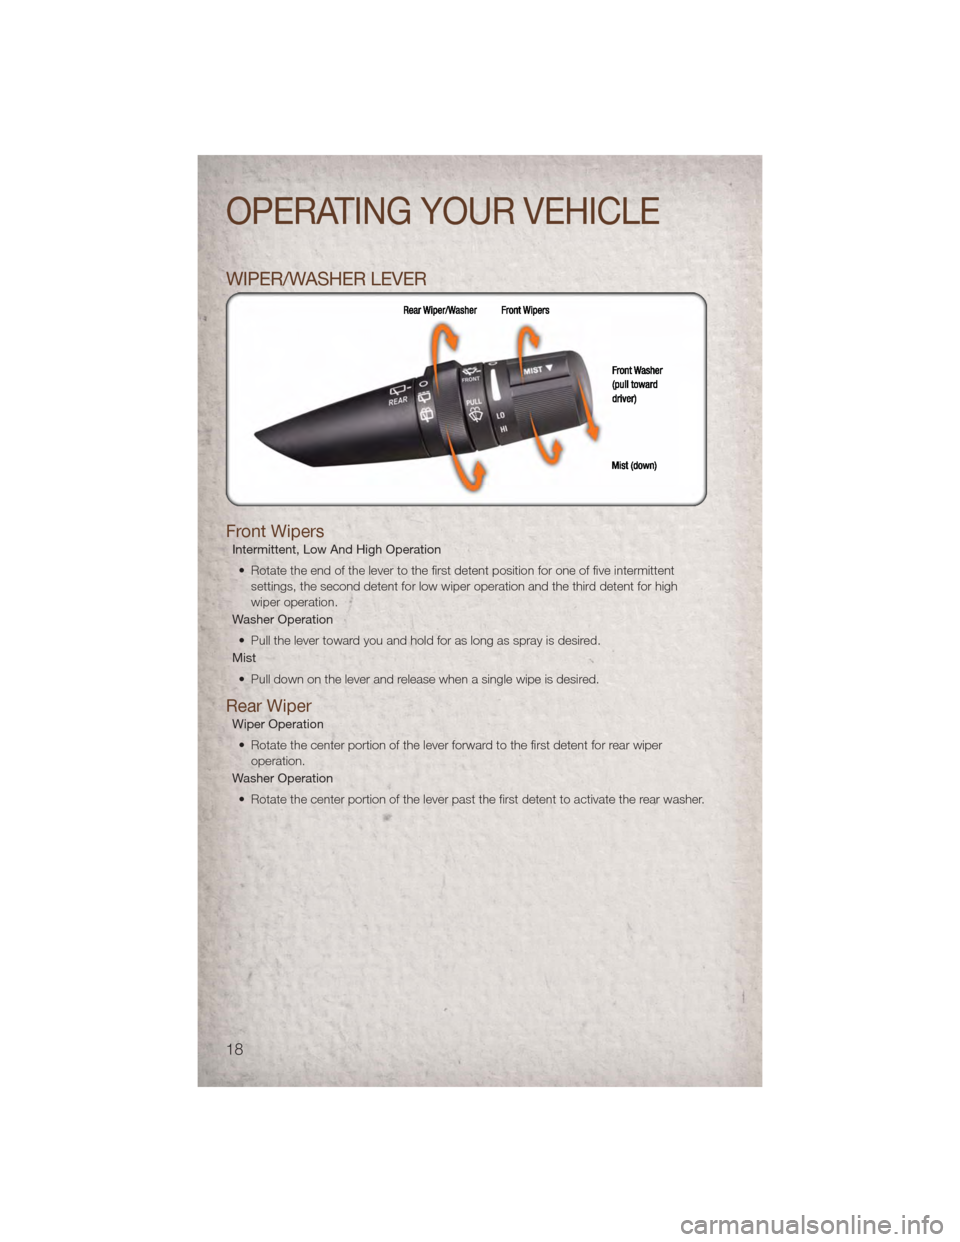 JEEP PATRIOT 2011 1.G Owners Manual WIPER/WASHER LEVER
Front Wipers
Intermittent, Low And High Operation• Rotate the end of the lever to the first detent position for one of five intermittent settings, the second detent for low wiper 